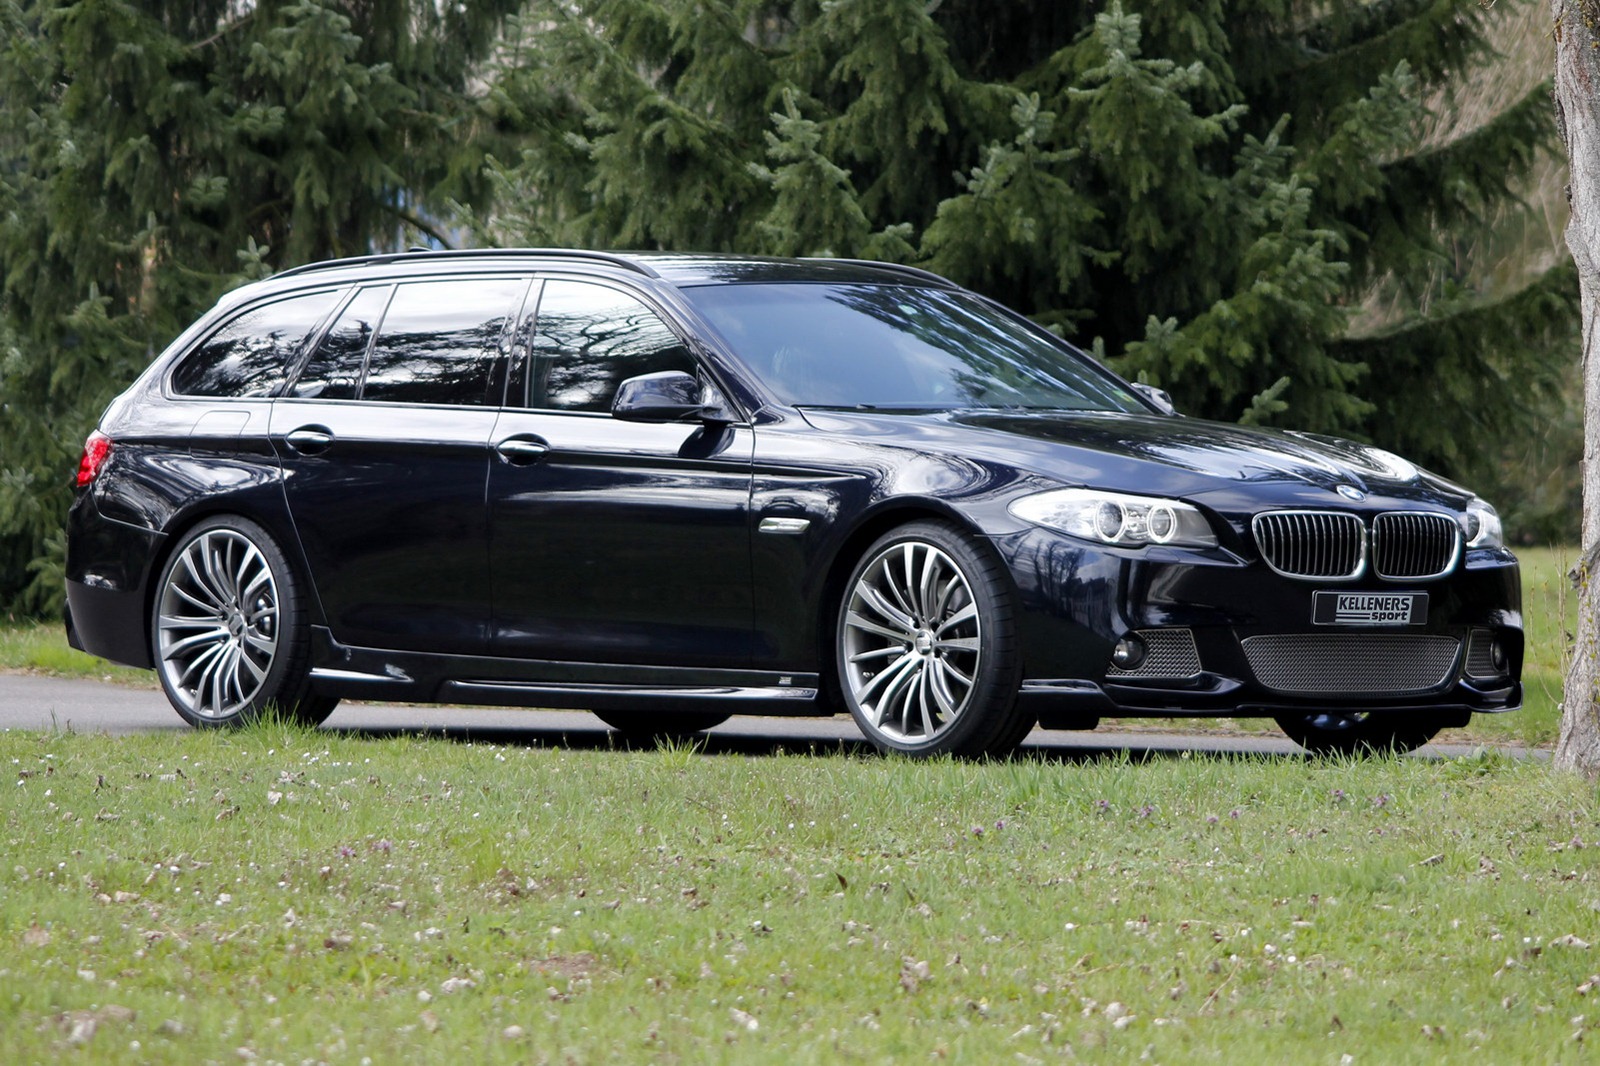 BMW 5 Series Touring by Kelleners Sport